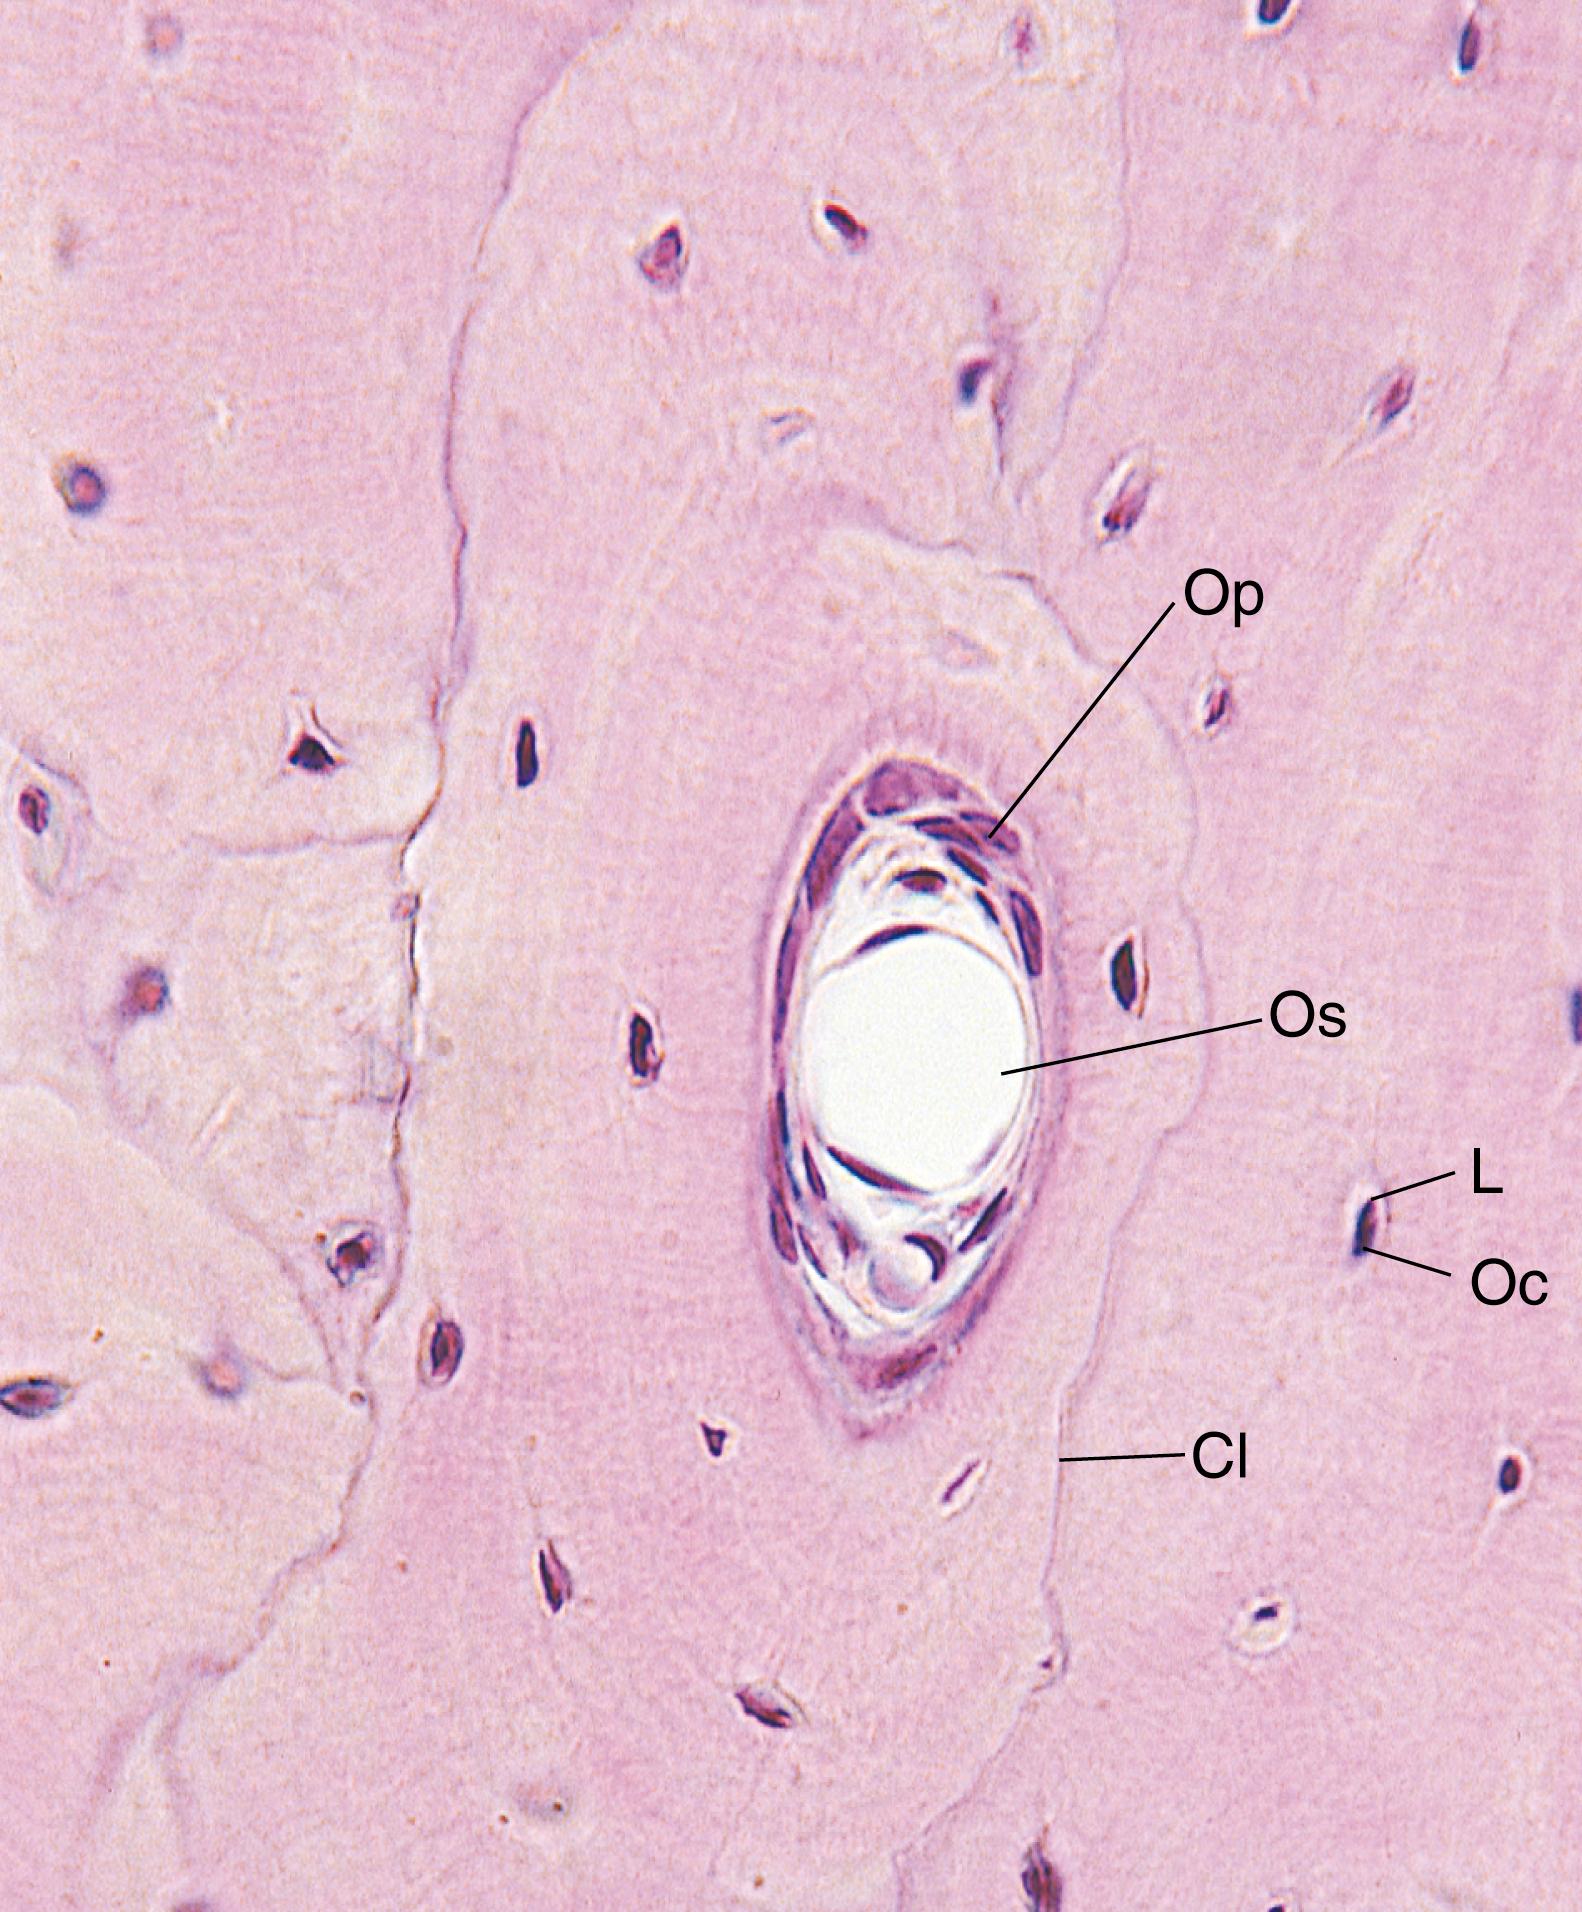 Fig. 7.9, Light micrograph of decalcified compact bone (×540). Osteocytes (Oc) may be observed in lacunae (L). Also note the blood vessel (Os) and osteoprogenitor cells (Op) in the haversian canal of the osteon, and observe the cementing lines (Cl) that completely surround osteons.